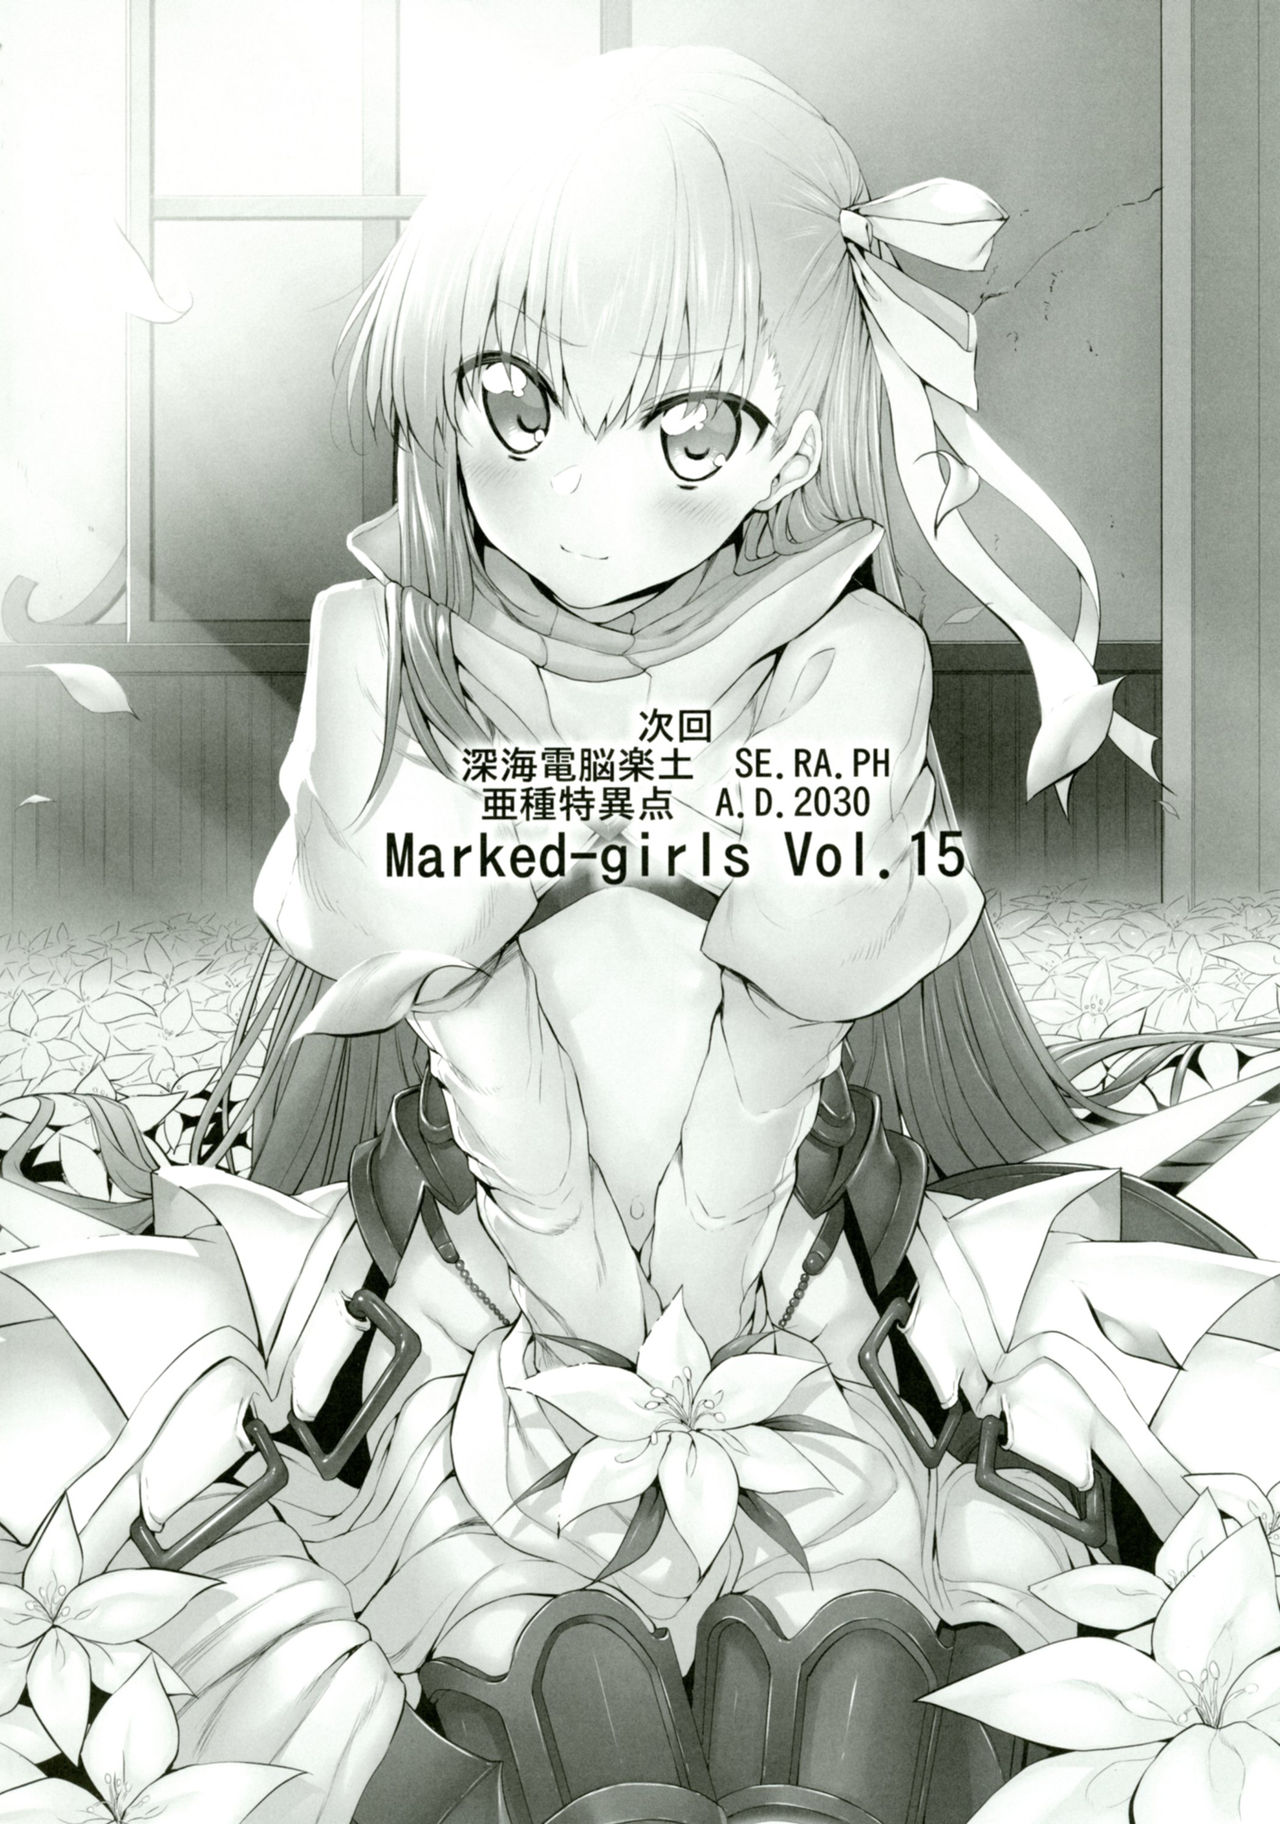 [Marked-two (Suga Hideo)] Marked Girls Vol. 14 (Fate/Grand Order) [Digital] [Marked-two (スガヒデオ)] Marked girls vol.14 (Fate/Grand Order) [DL版]